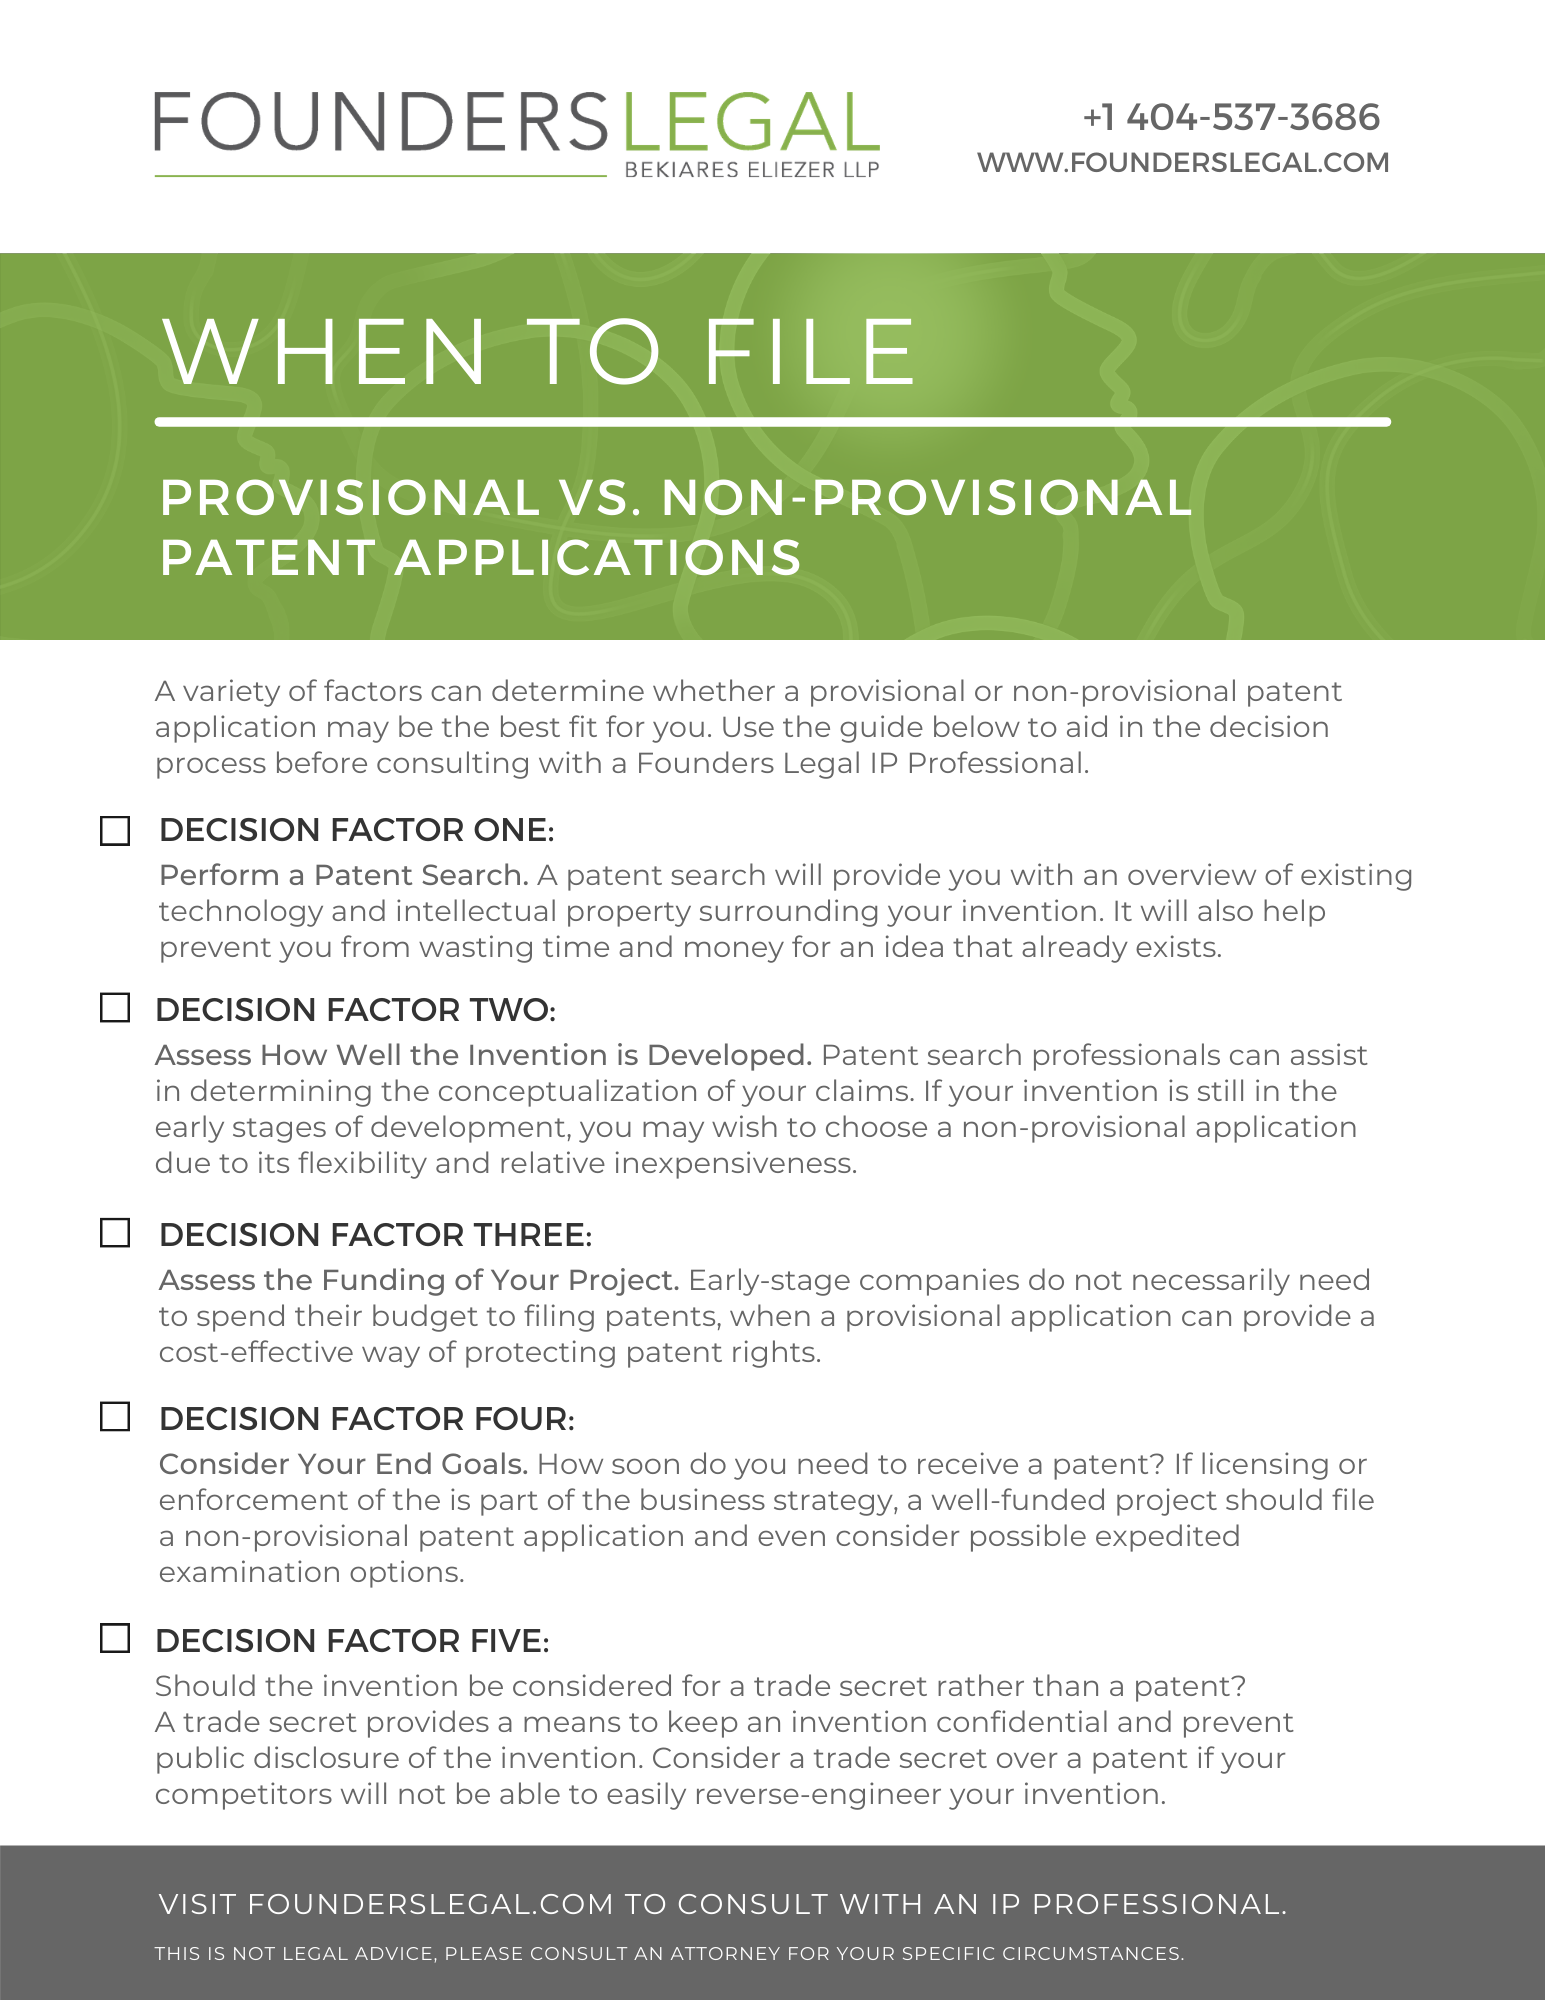 When to File a Provisional Patent Application or Non-Provisional Patent Application Guide - Page 01